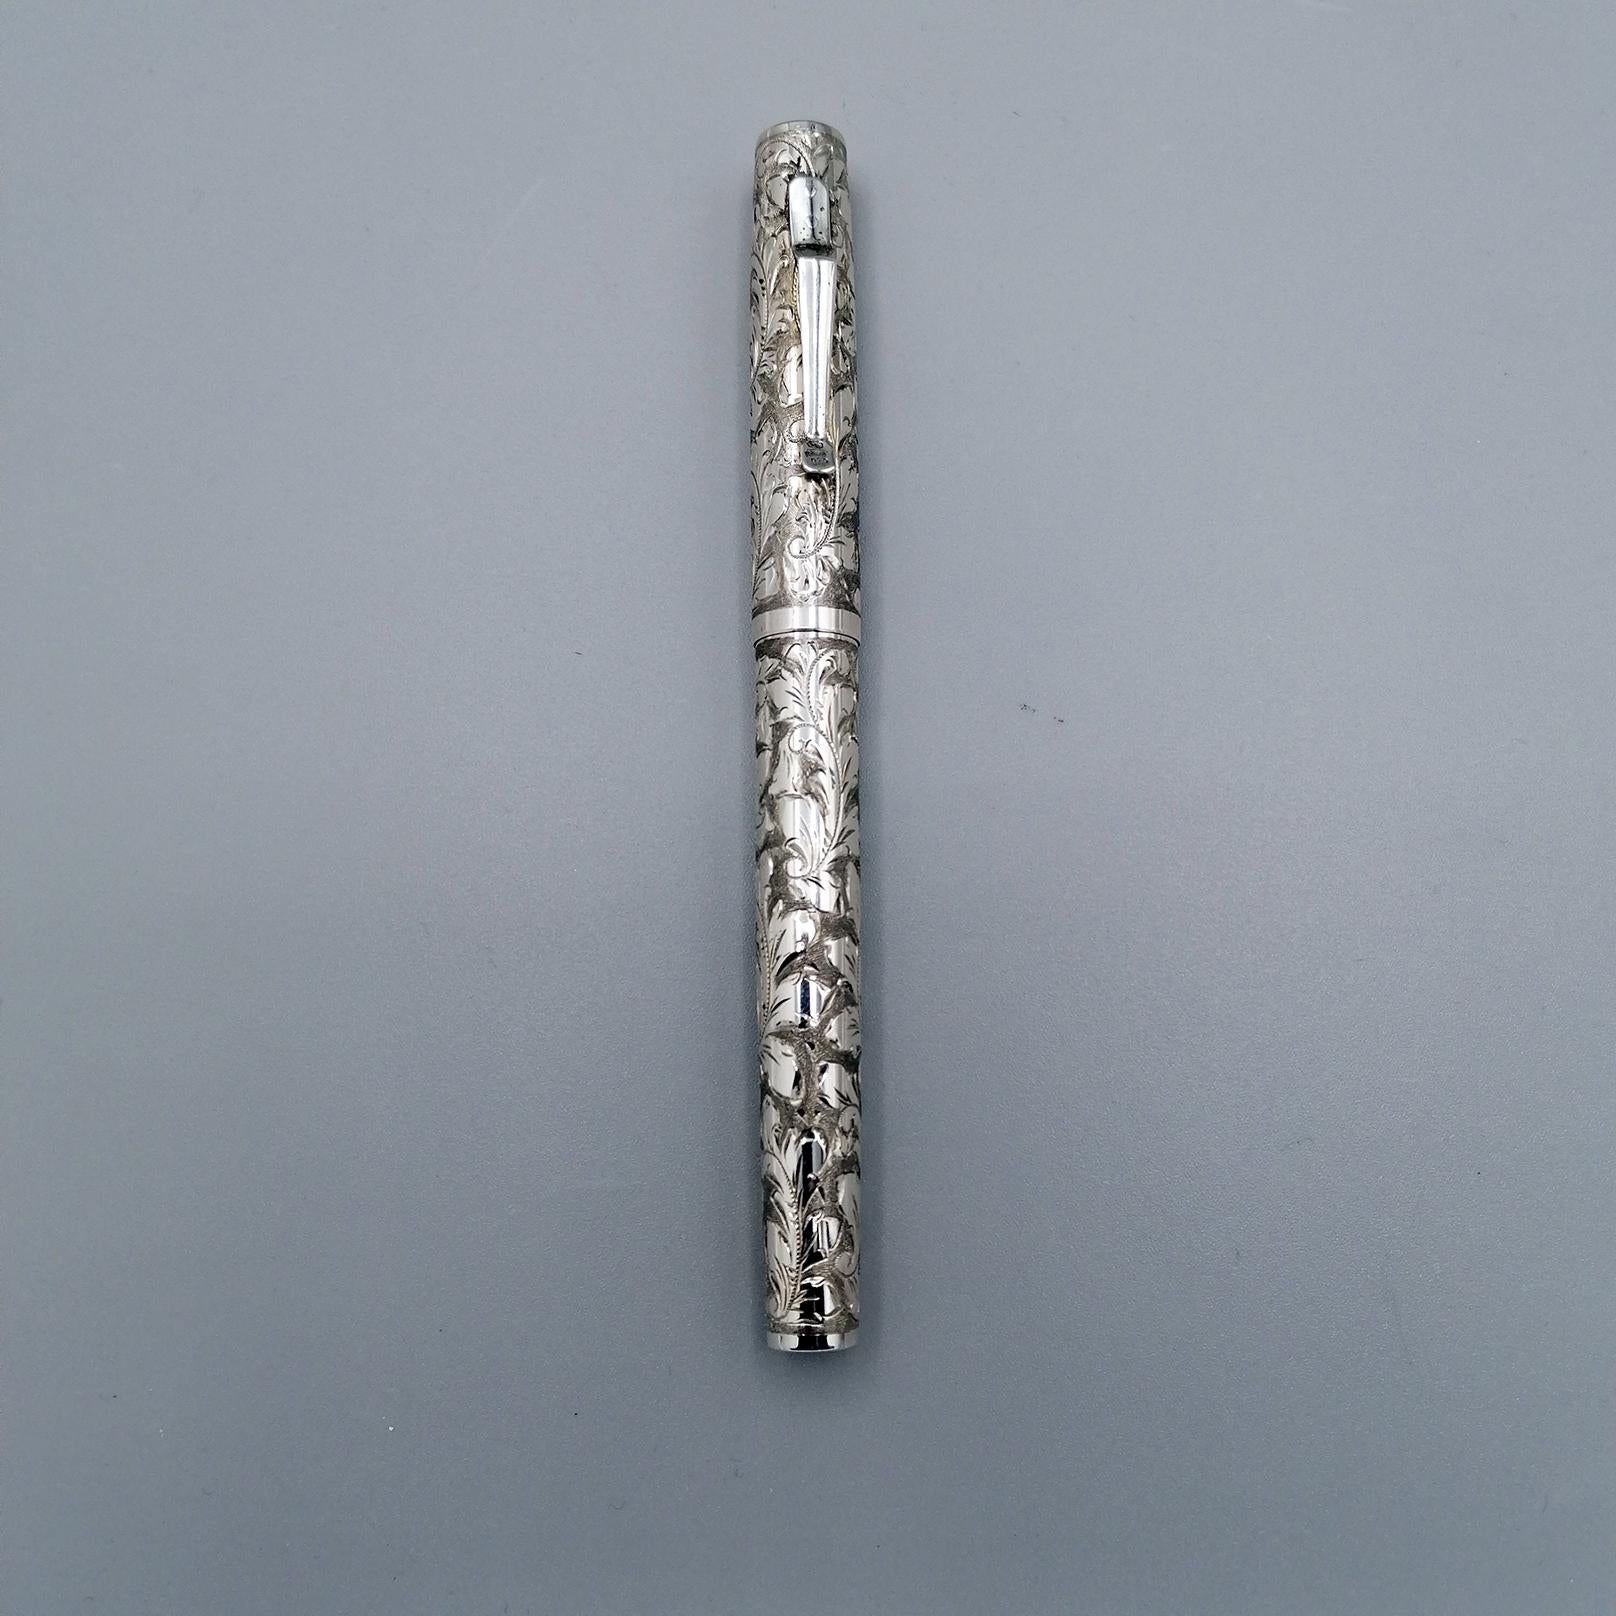 Fountain pen made of solid silver, completely handcrafted and engraved with baroque volutes.
The care with which this fountain pen was made denotes the experience and artistic hand of its manufacturer, Il Laboratorio Settelaghi di Ferrari -Varese,